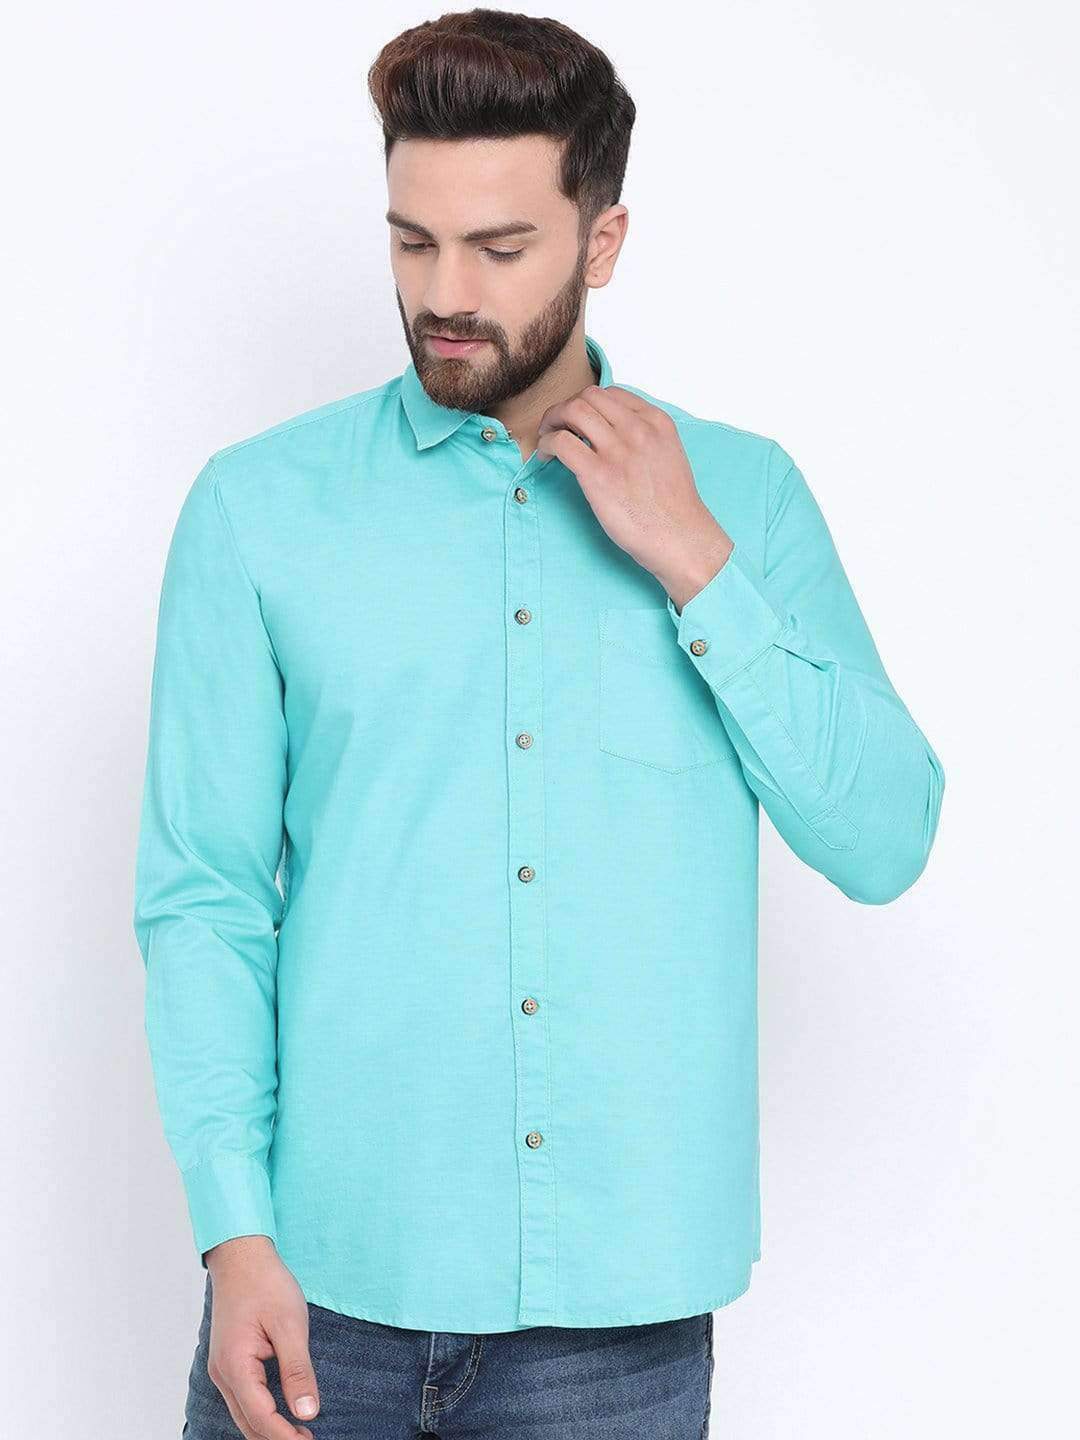 best slim fit casual shirts